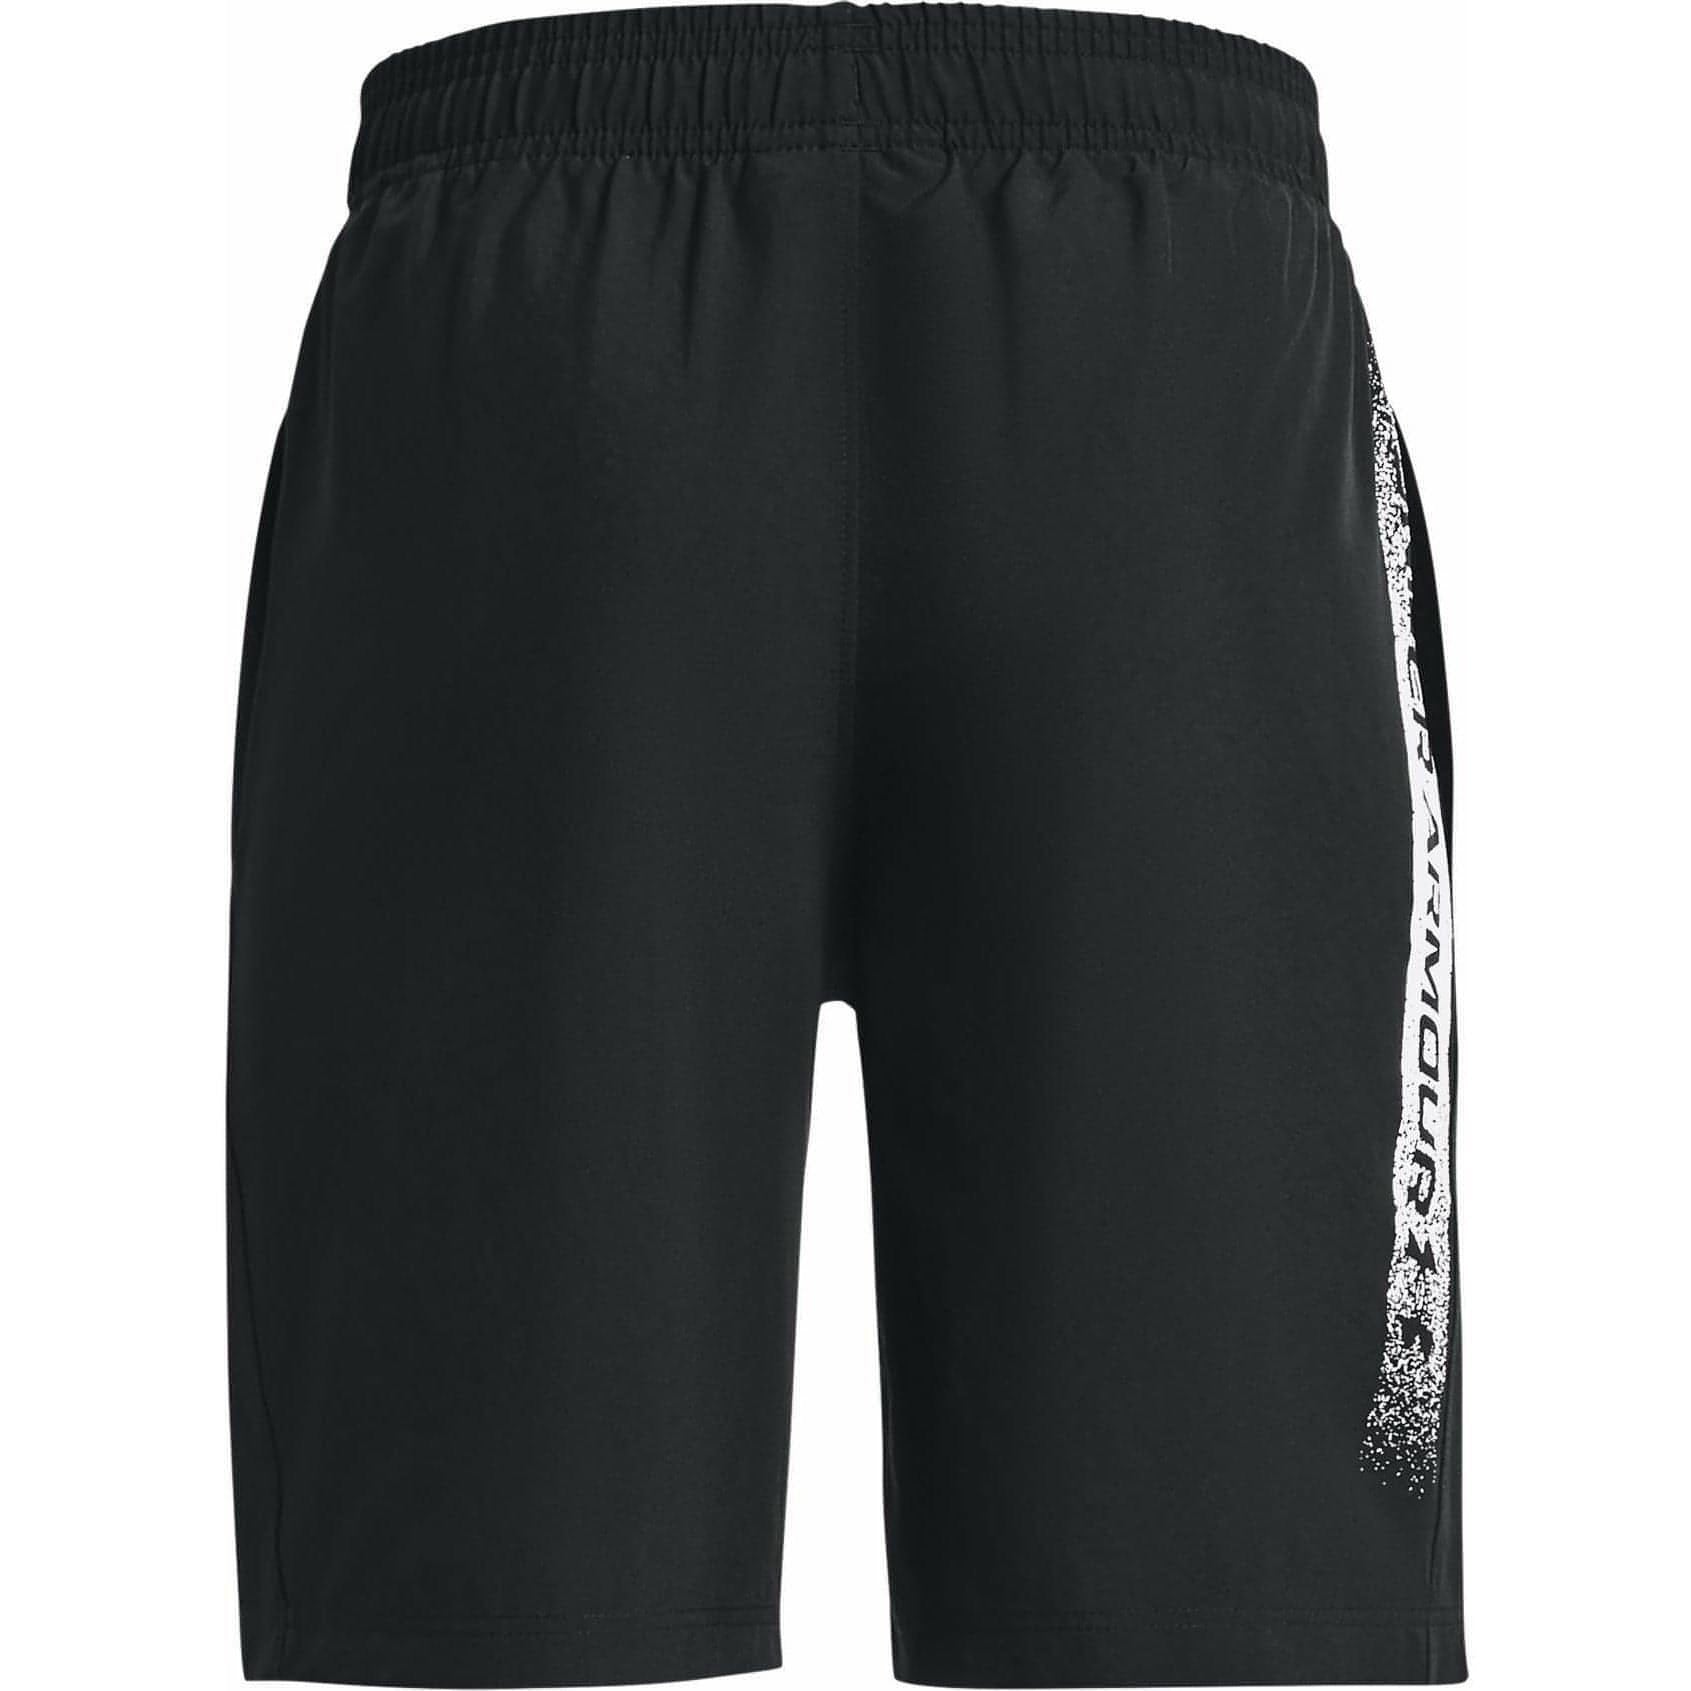 Under Armour Woven Graphic Shorts Back View